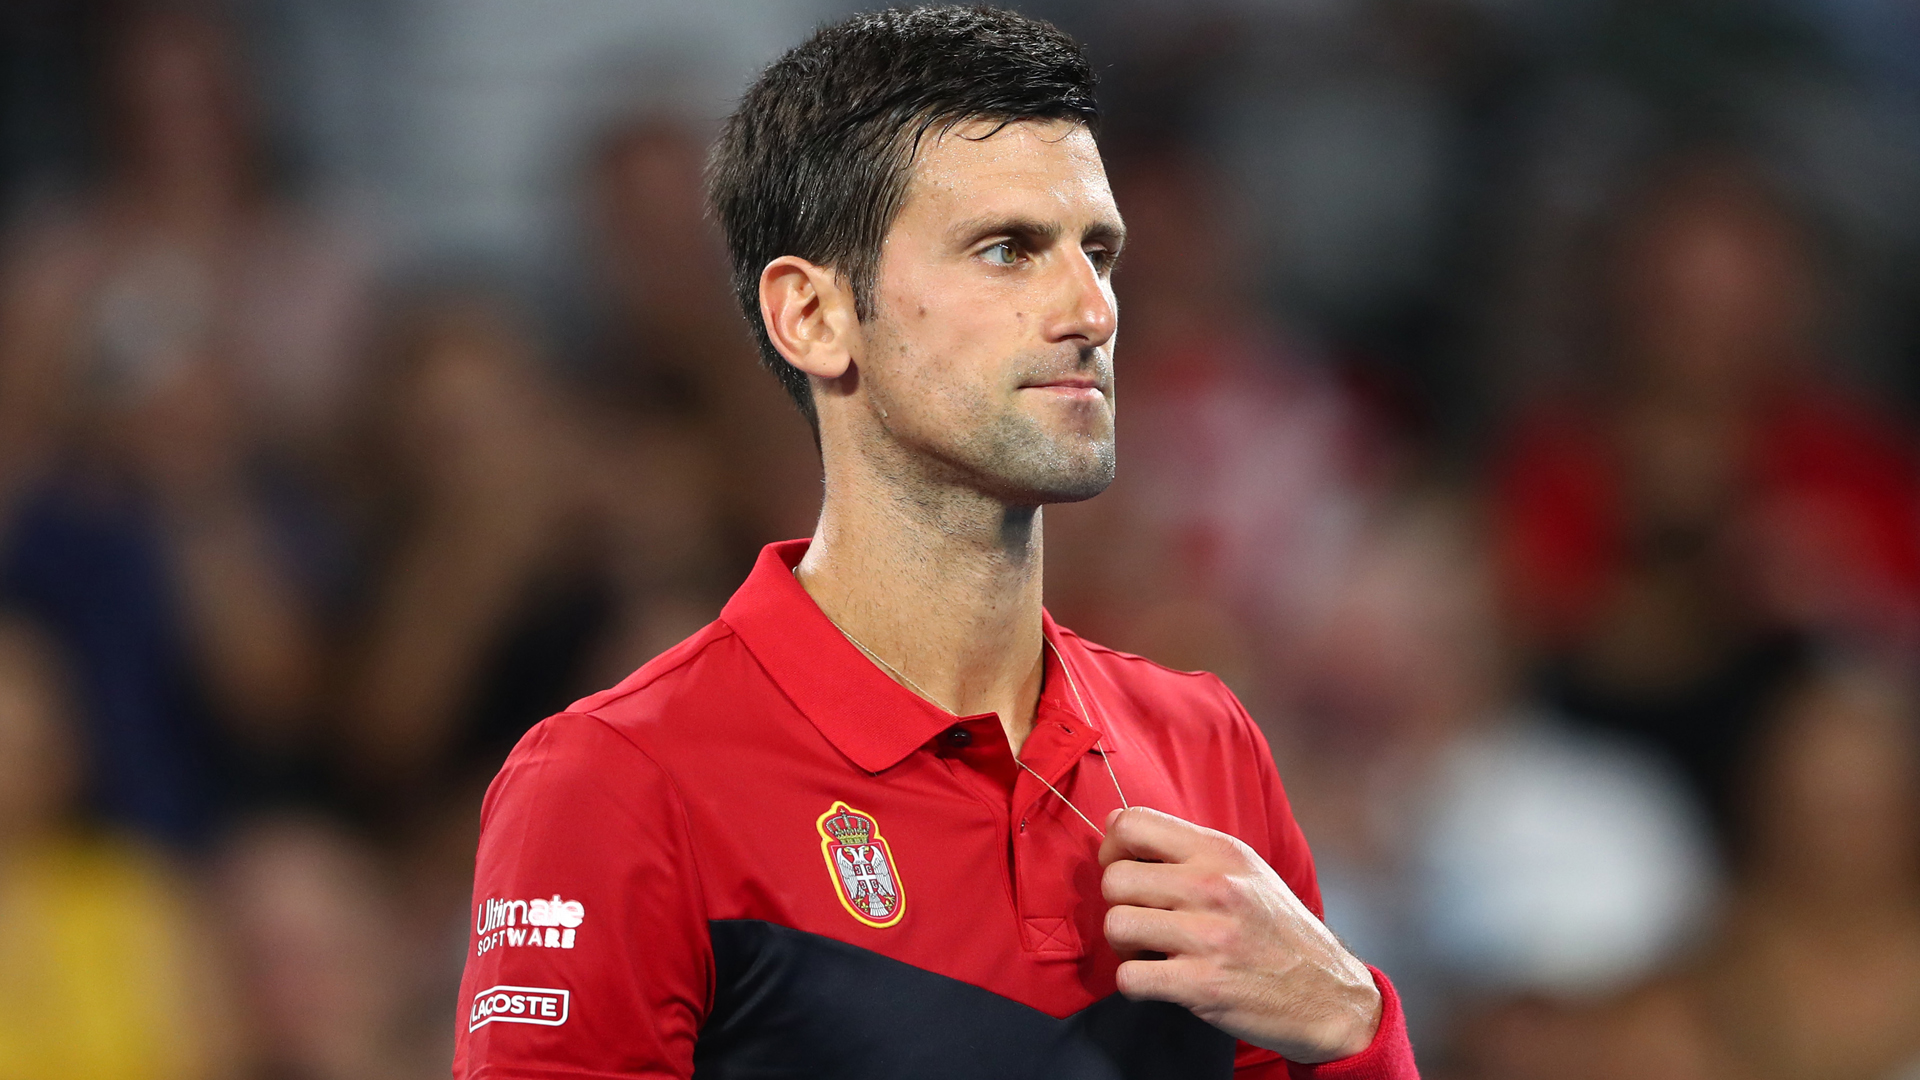 Novak Djokovic believes there is an agenda behind the criticism he has faced in the wake of the ill-fated Adria Tour event.